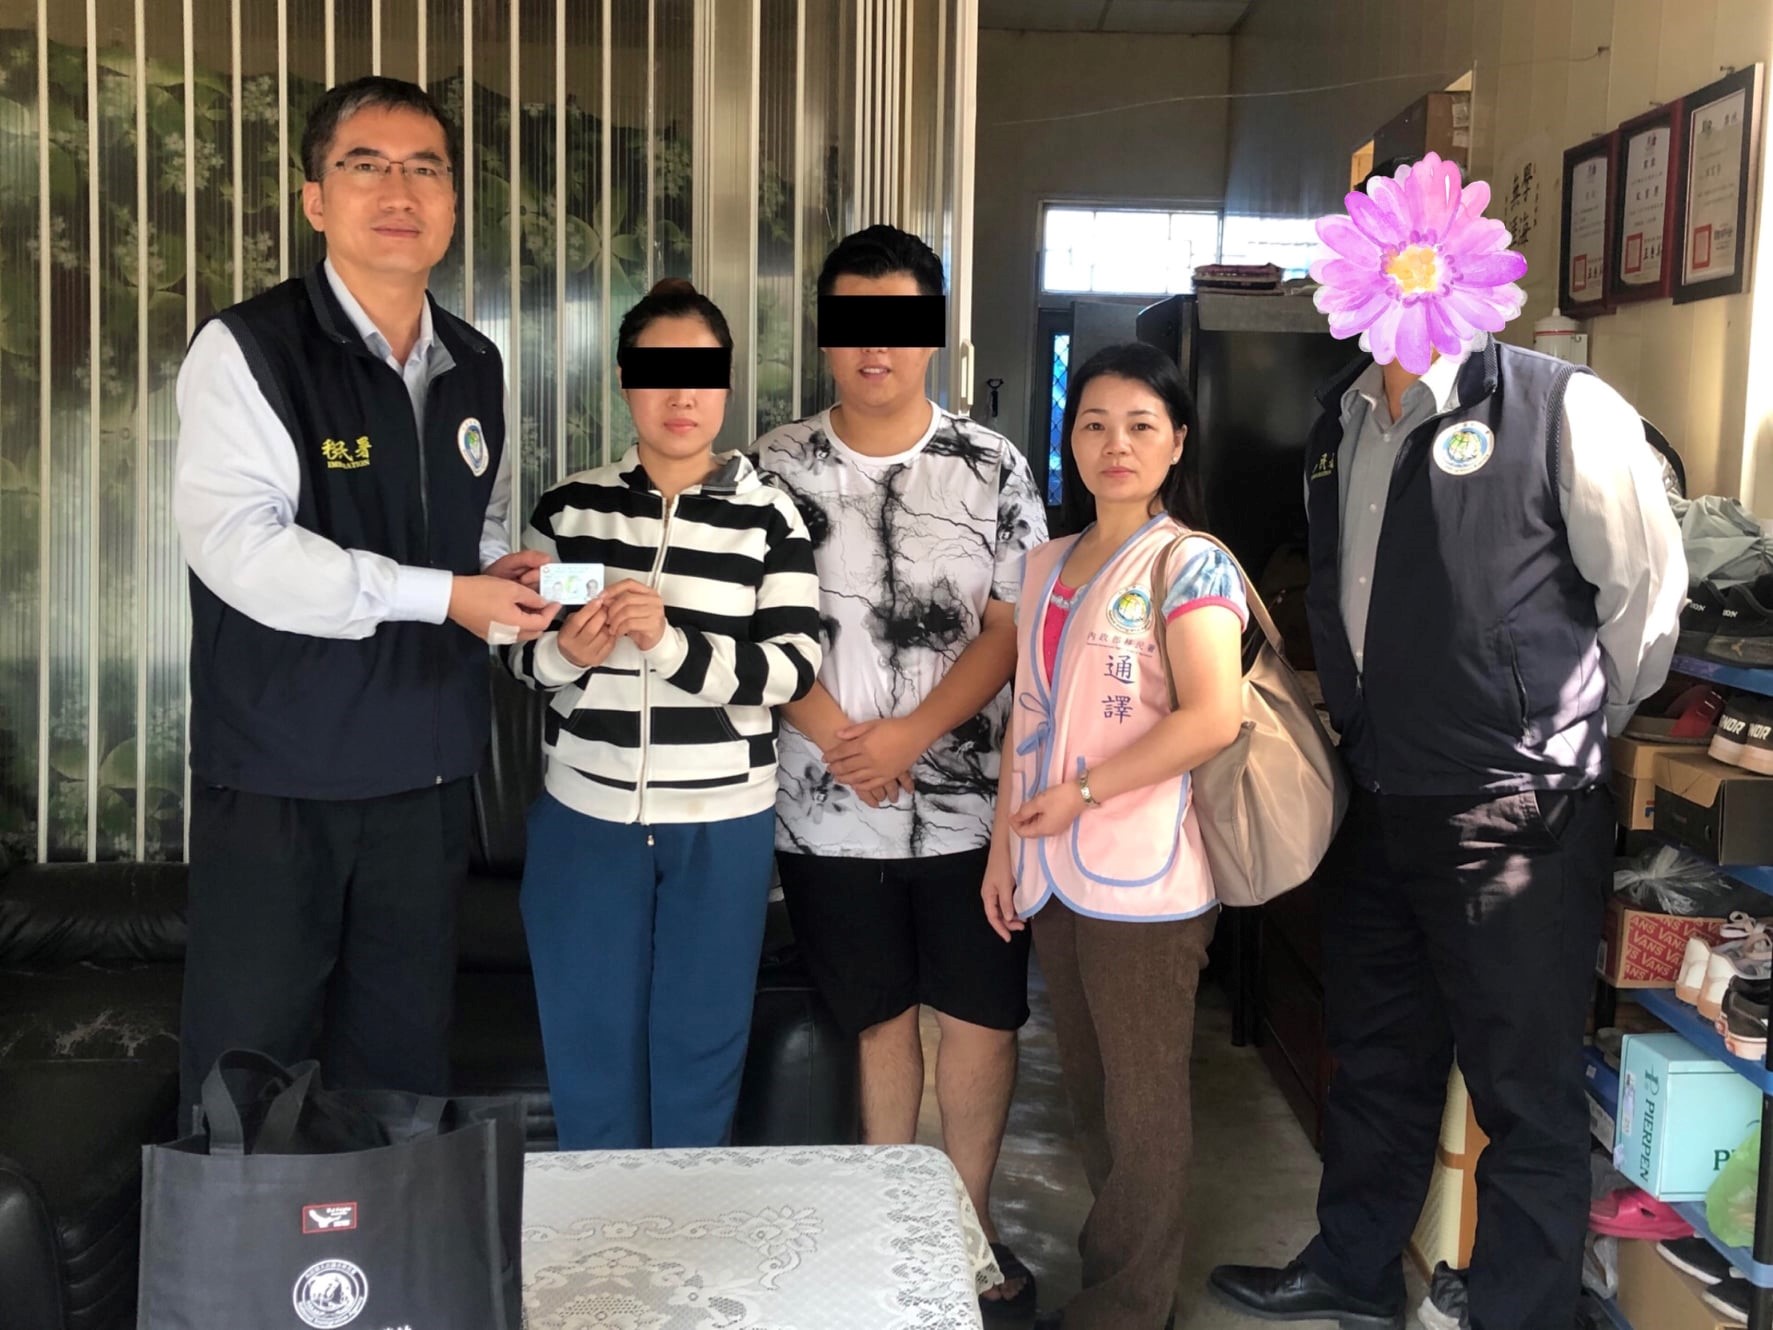 Chunghua immigration service team pictured with Ms. Chen who just got her resident visa in Taiwan/ Chunghua immigration service team photo